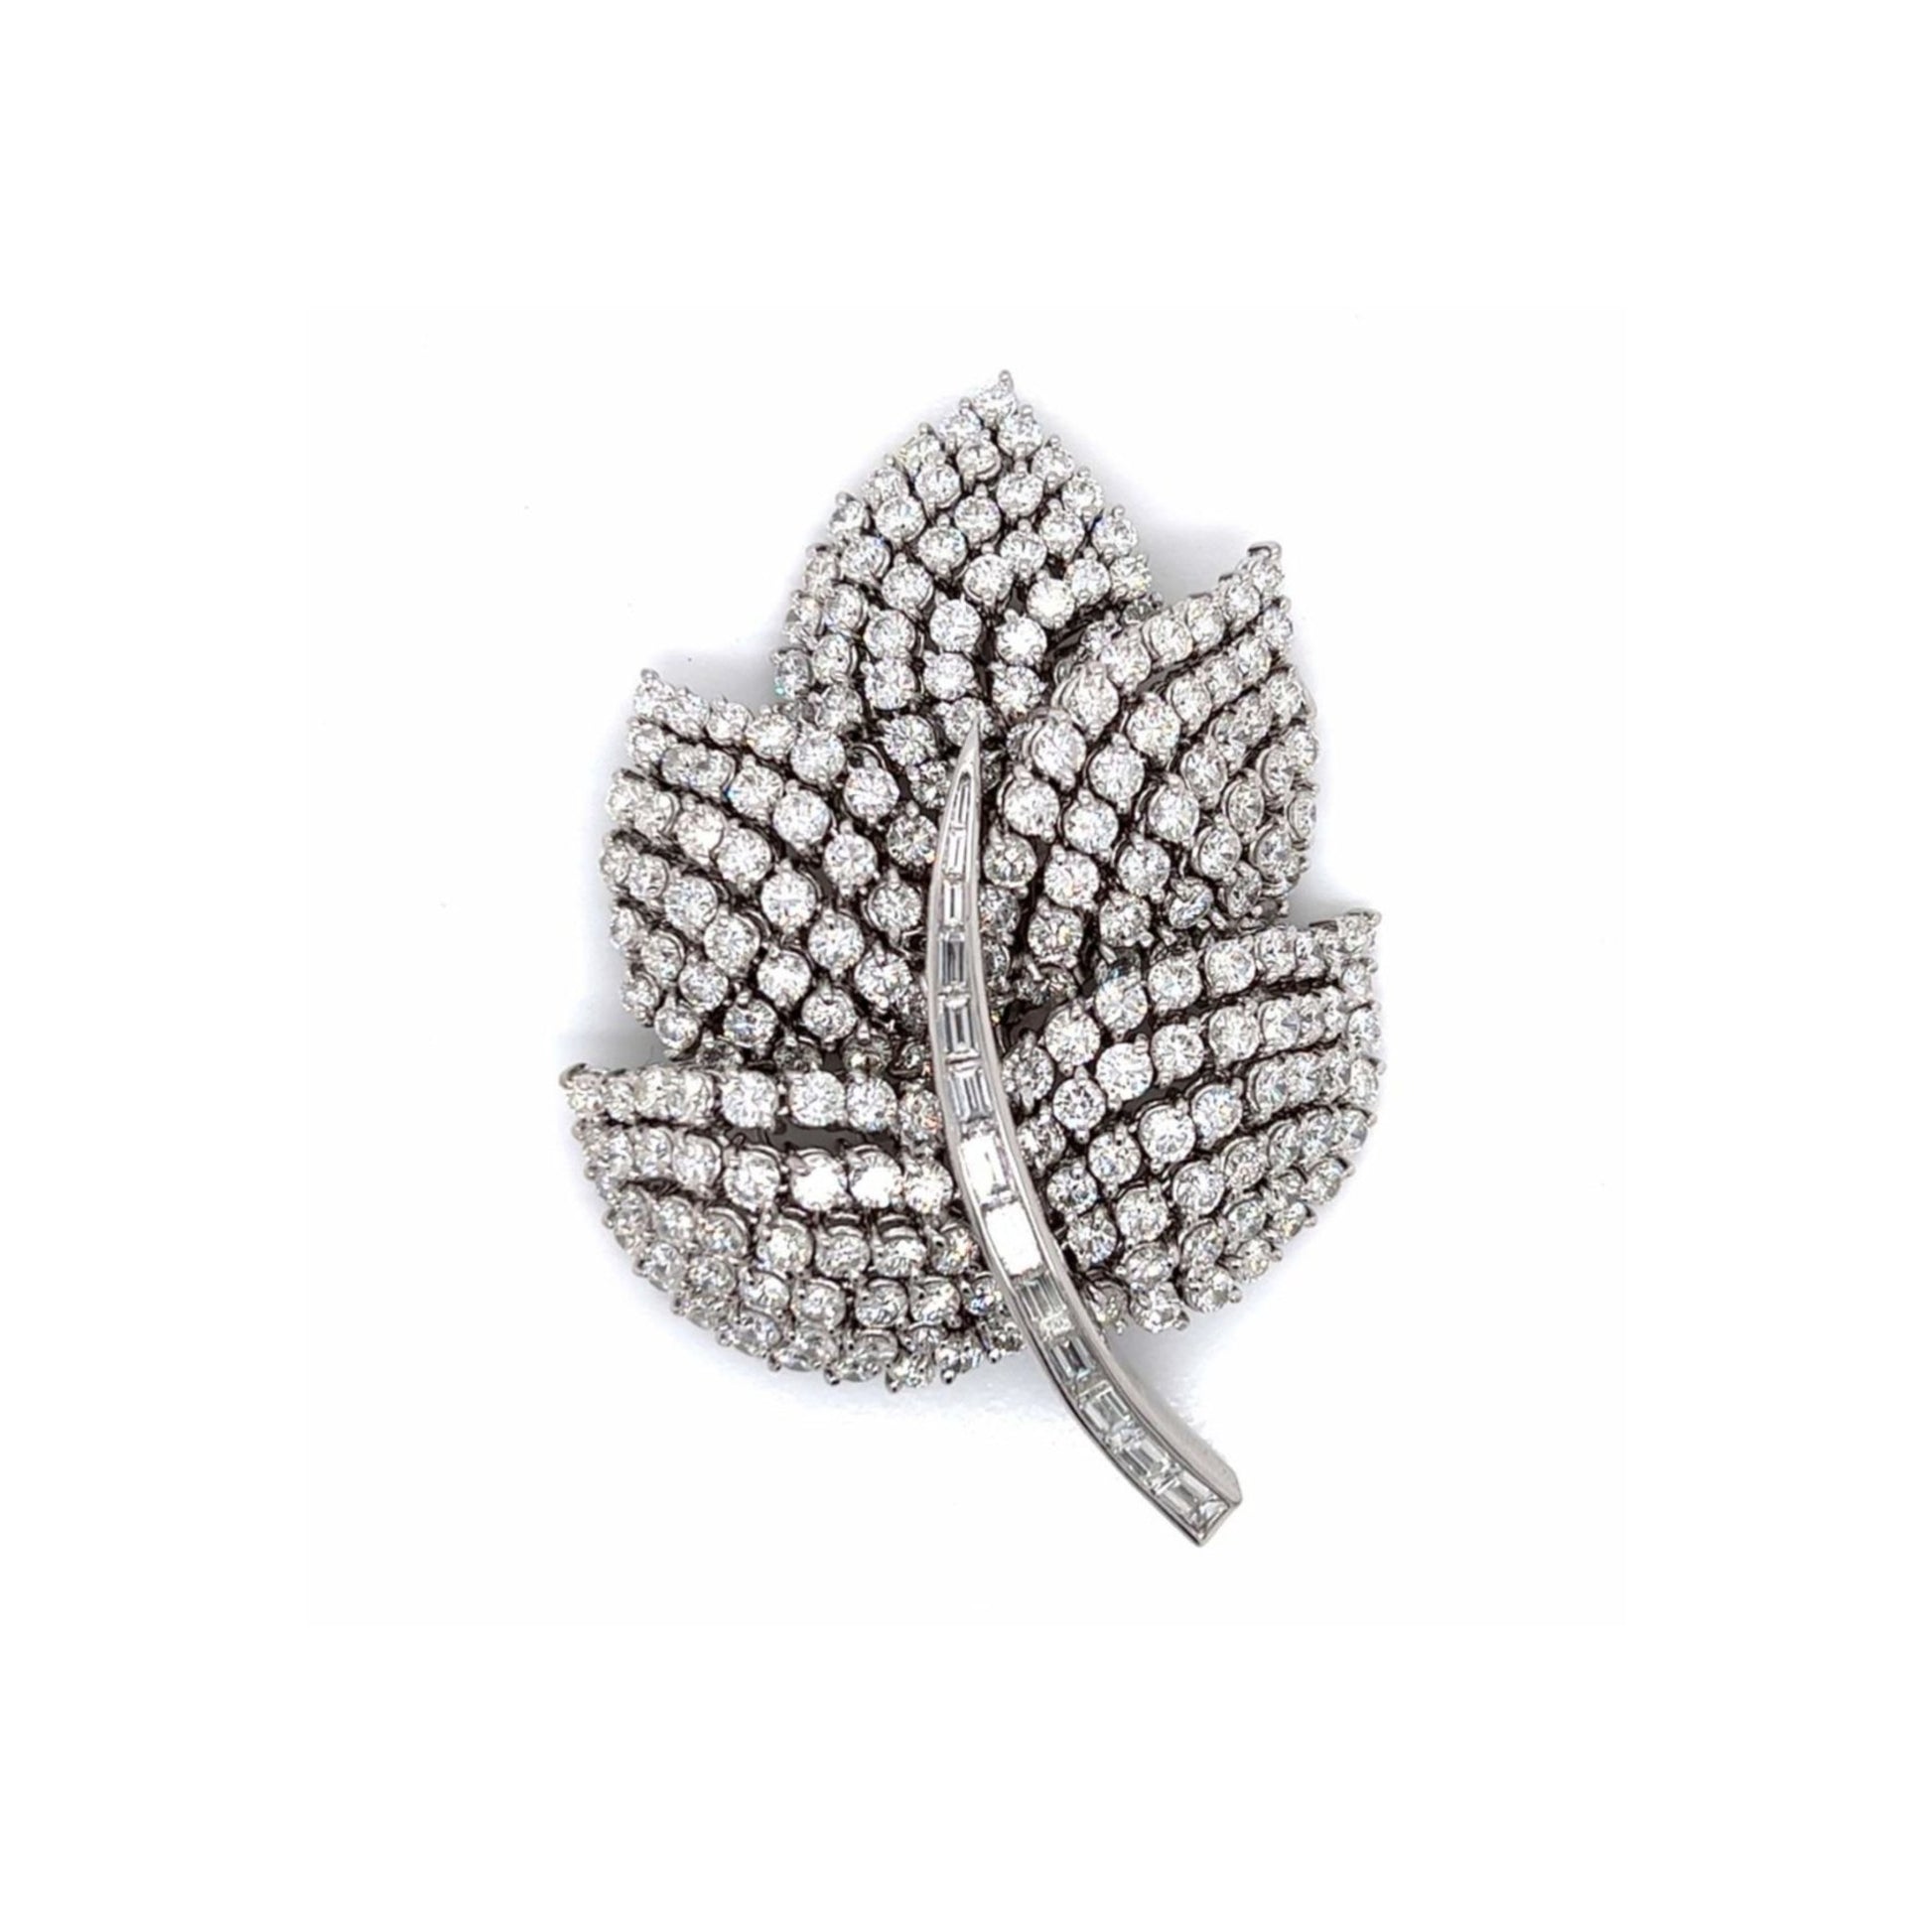 Post-1980s 18KT White Gold Diamond Leaf Brooch front view